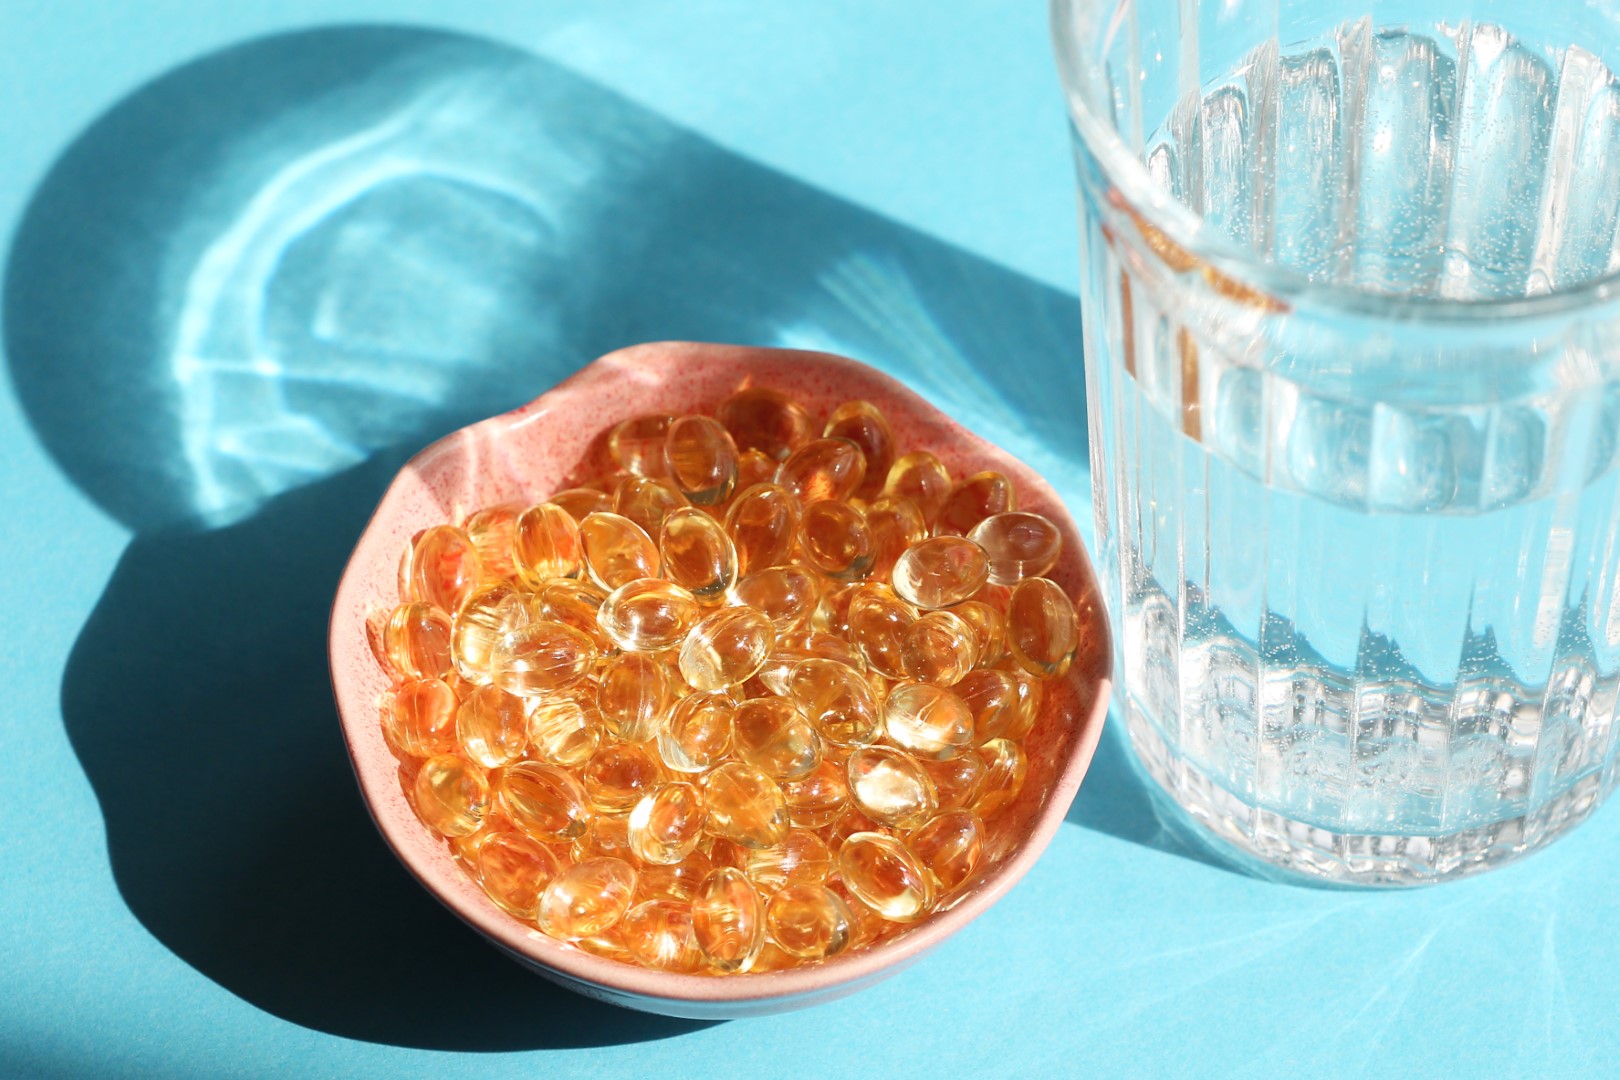 Nutritional Supplements as Vitamin D Capsules in Small Pink Ceramic Plate Next The Transparent Glass Of Water On Blue Background. Healthcare and Alternative Medicine, Immune System and Recovering, Sustainable Lifestyle. Still Life, Natural Lighting, Copy Space